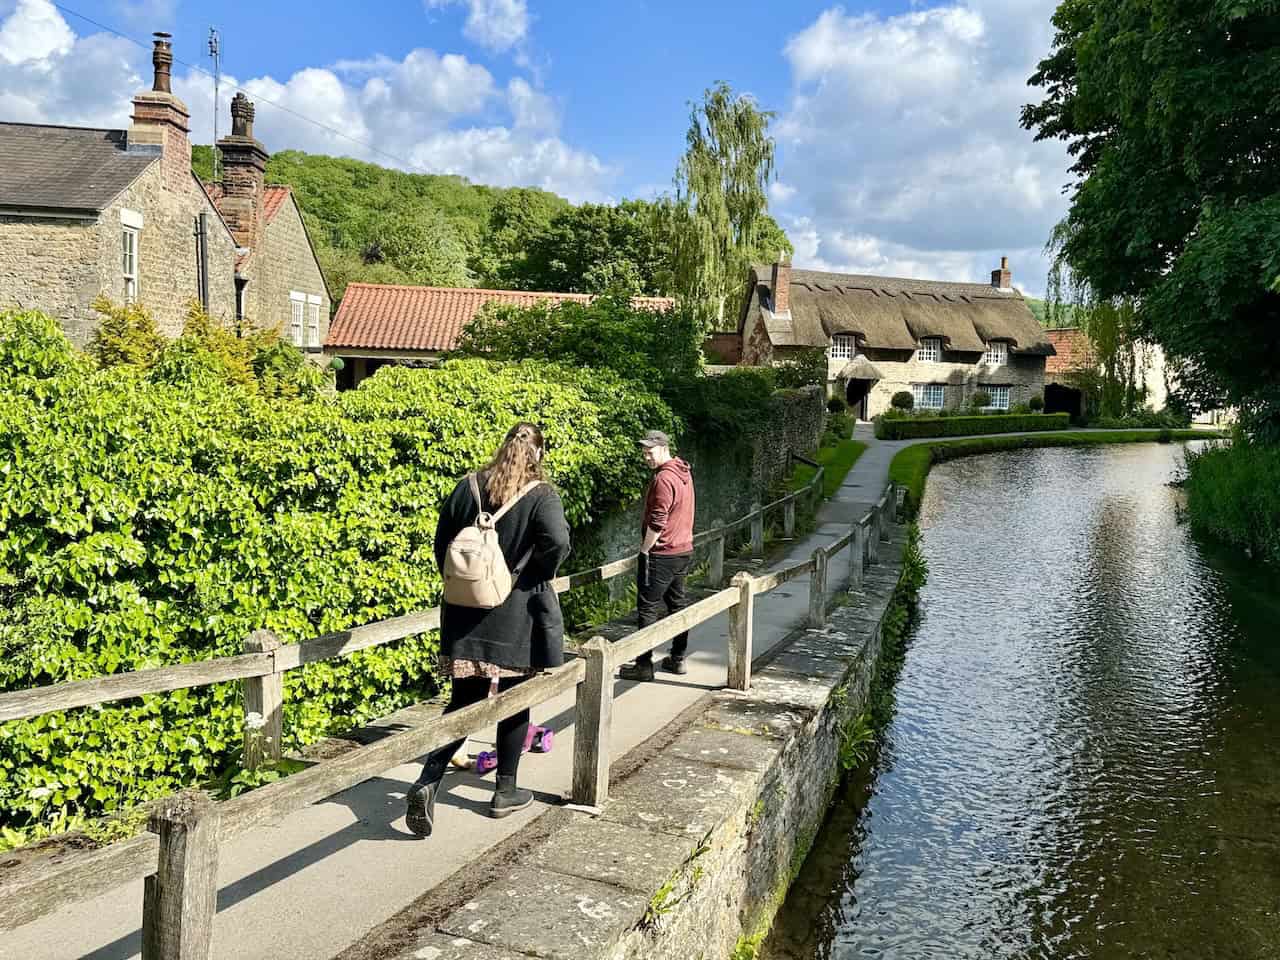 Soon after passing the almshouses, we follow the footpath along Thornton Beck. This beck meanders through the village before joining the River Derwent a couple of miles to the south.